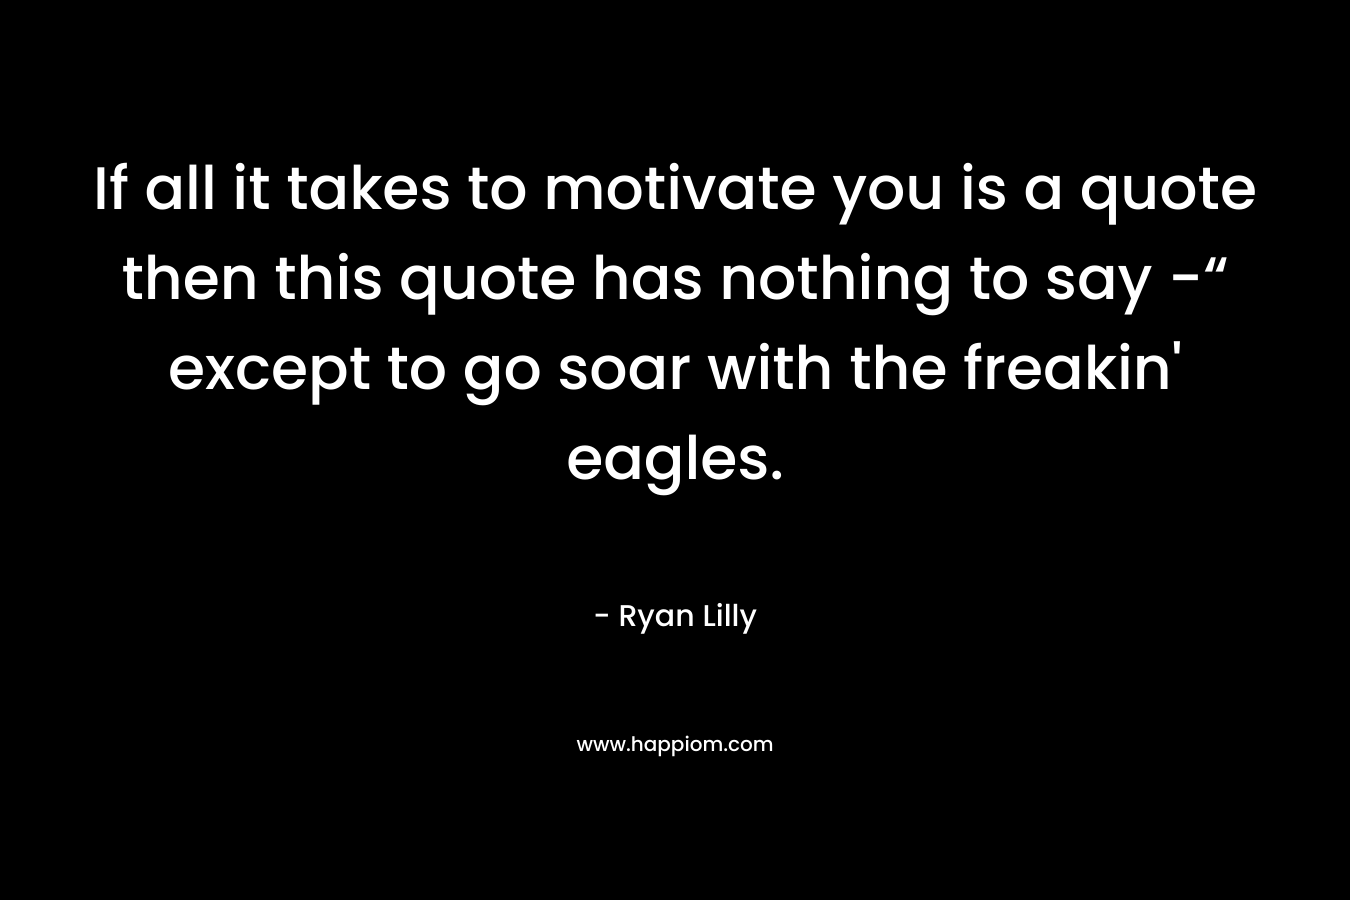 If all it takes to motivate you is a quote then this quote has nothing to say -“ except to go soar with the freakin' eagles.